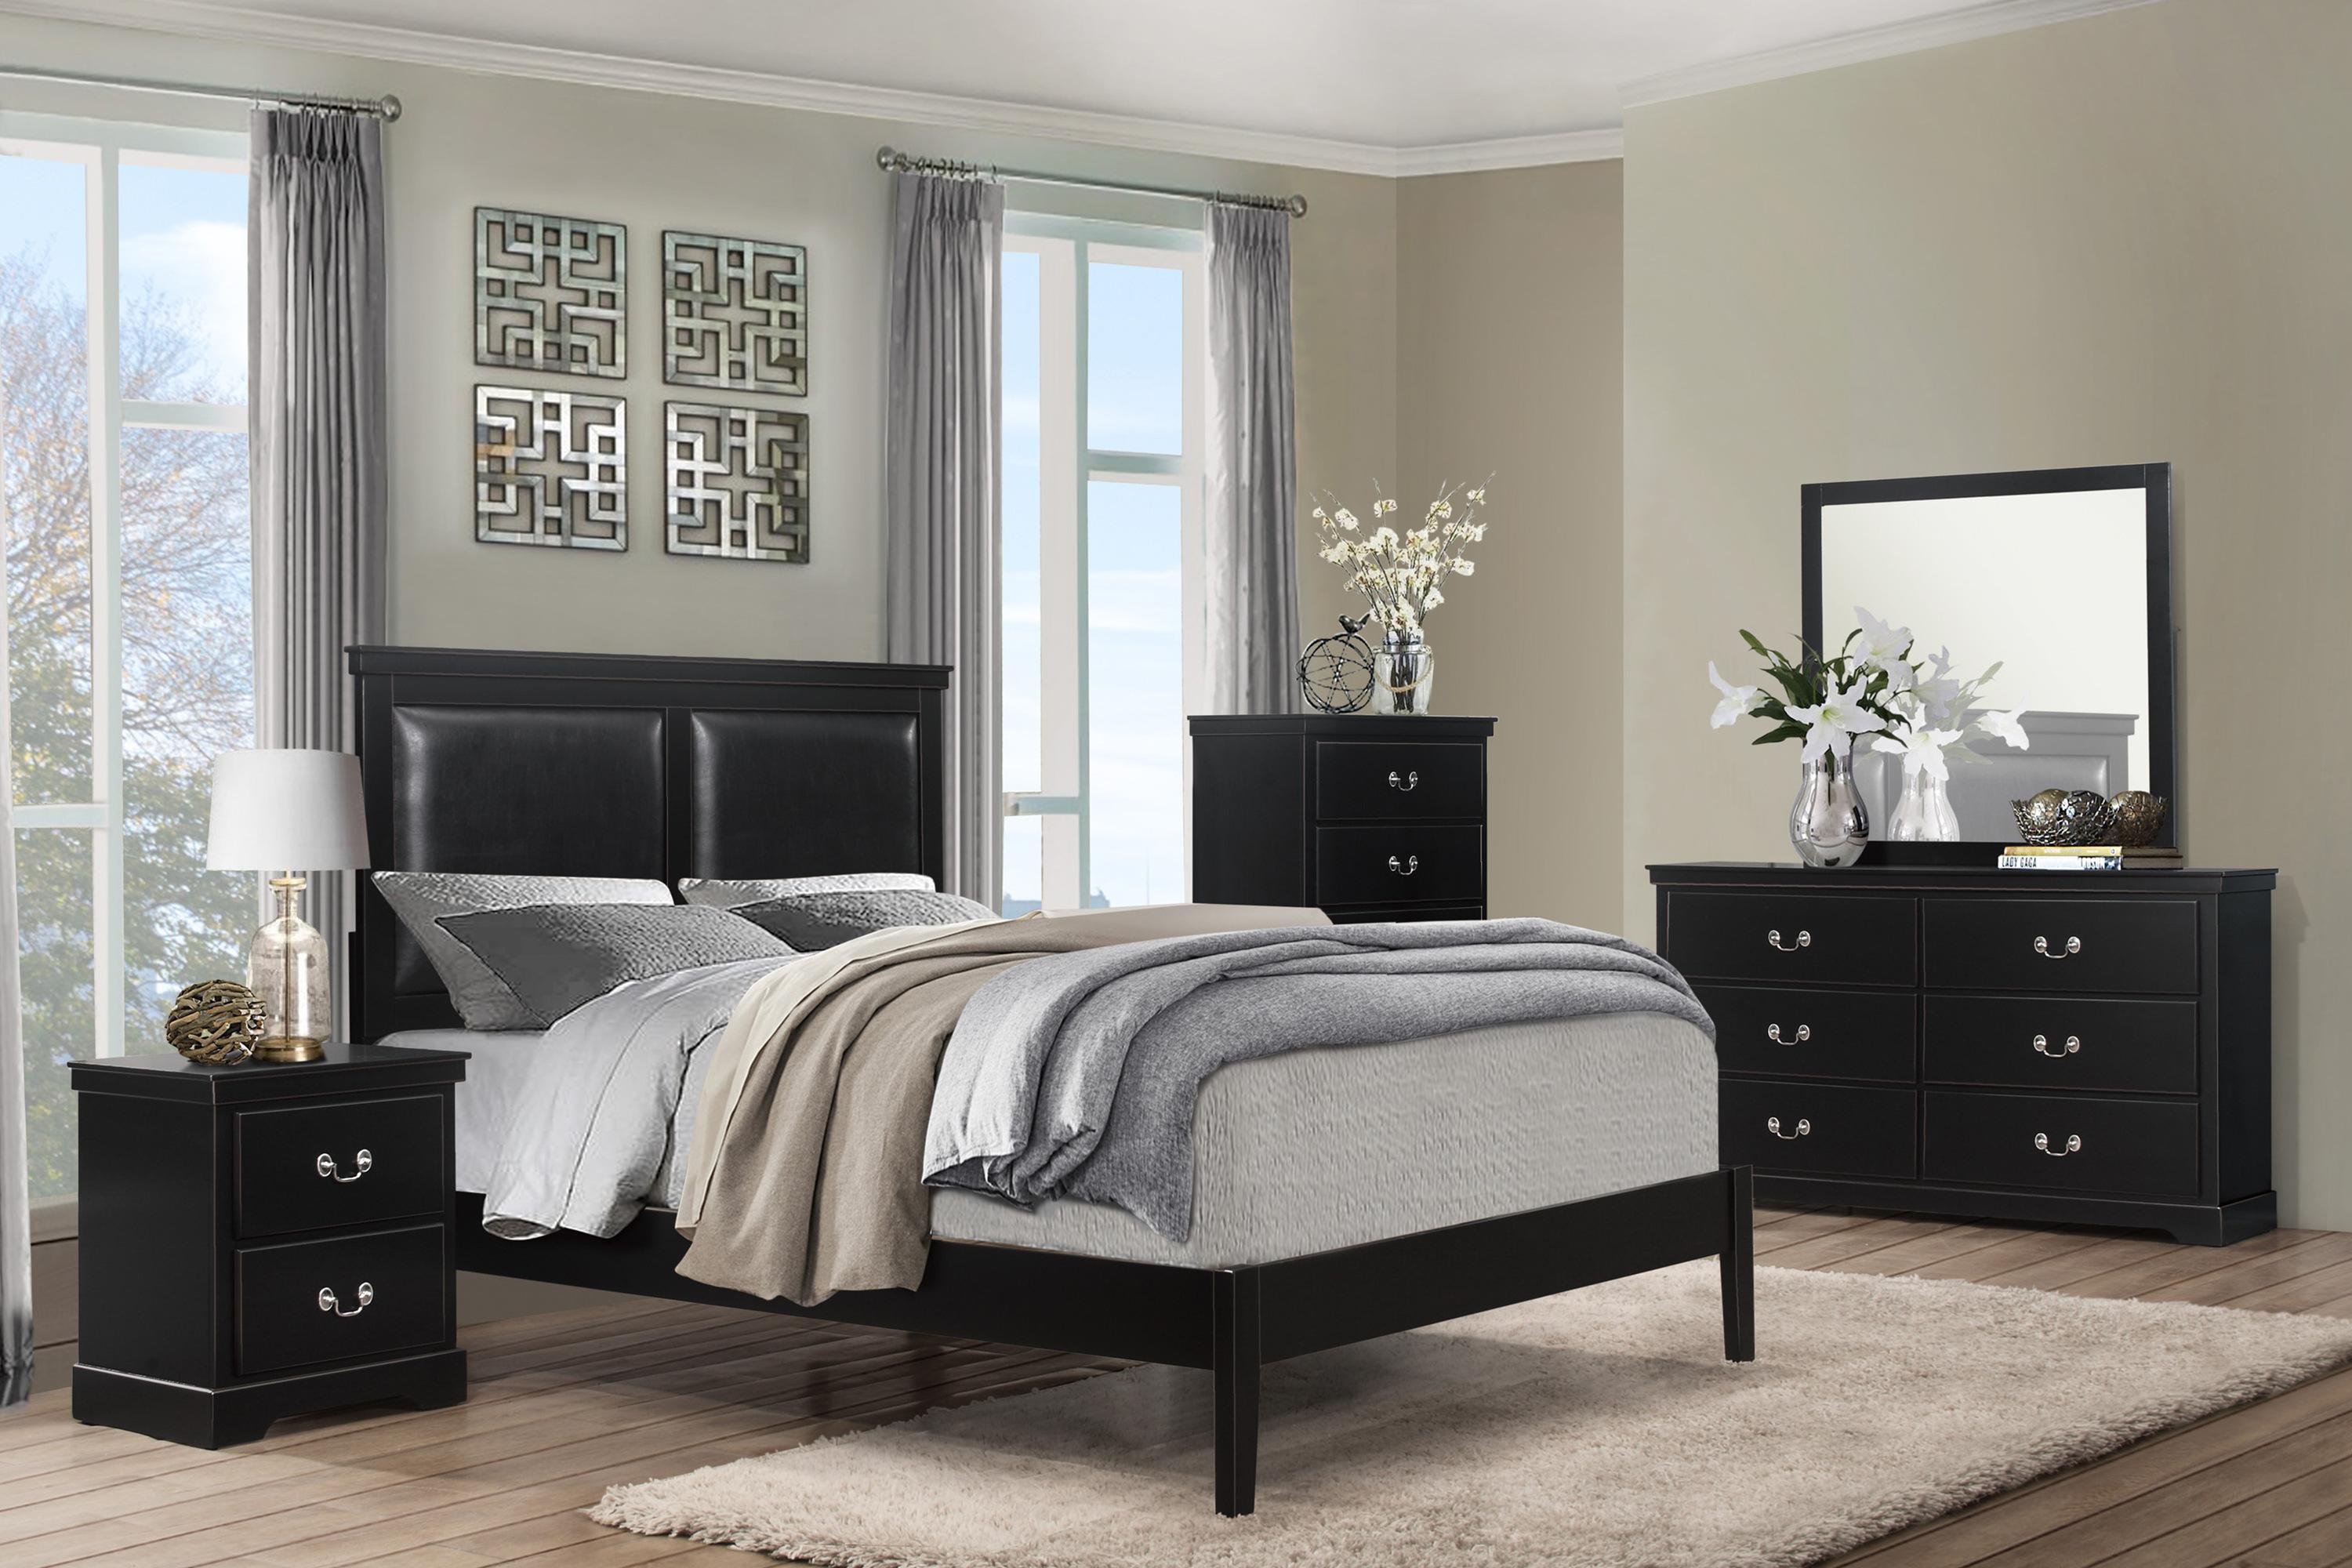 Modern Bedroom Set 1519BKF-1-5PC Seabright 1519BKF-1-5PC in Black Faux Leather